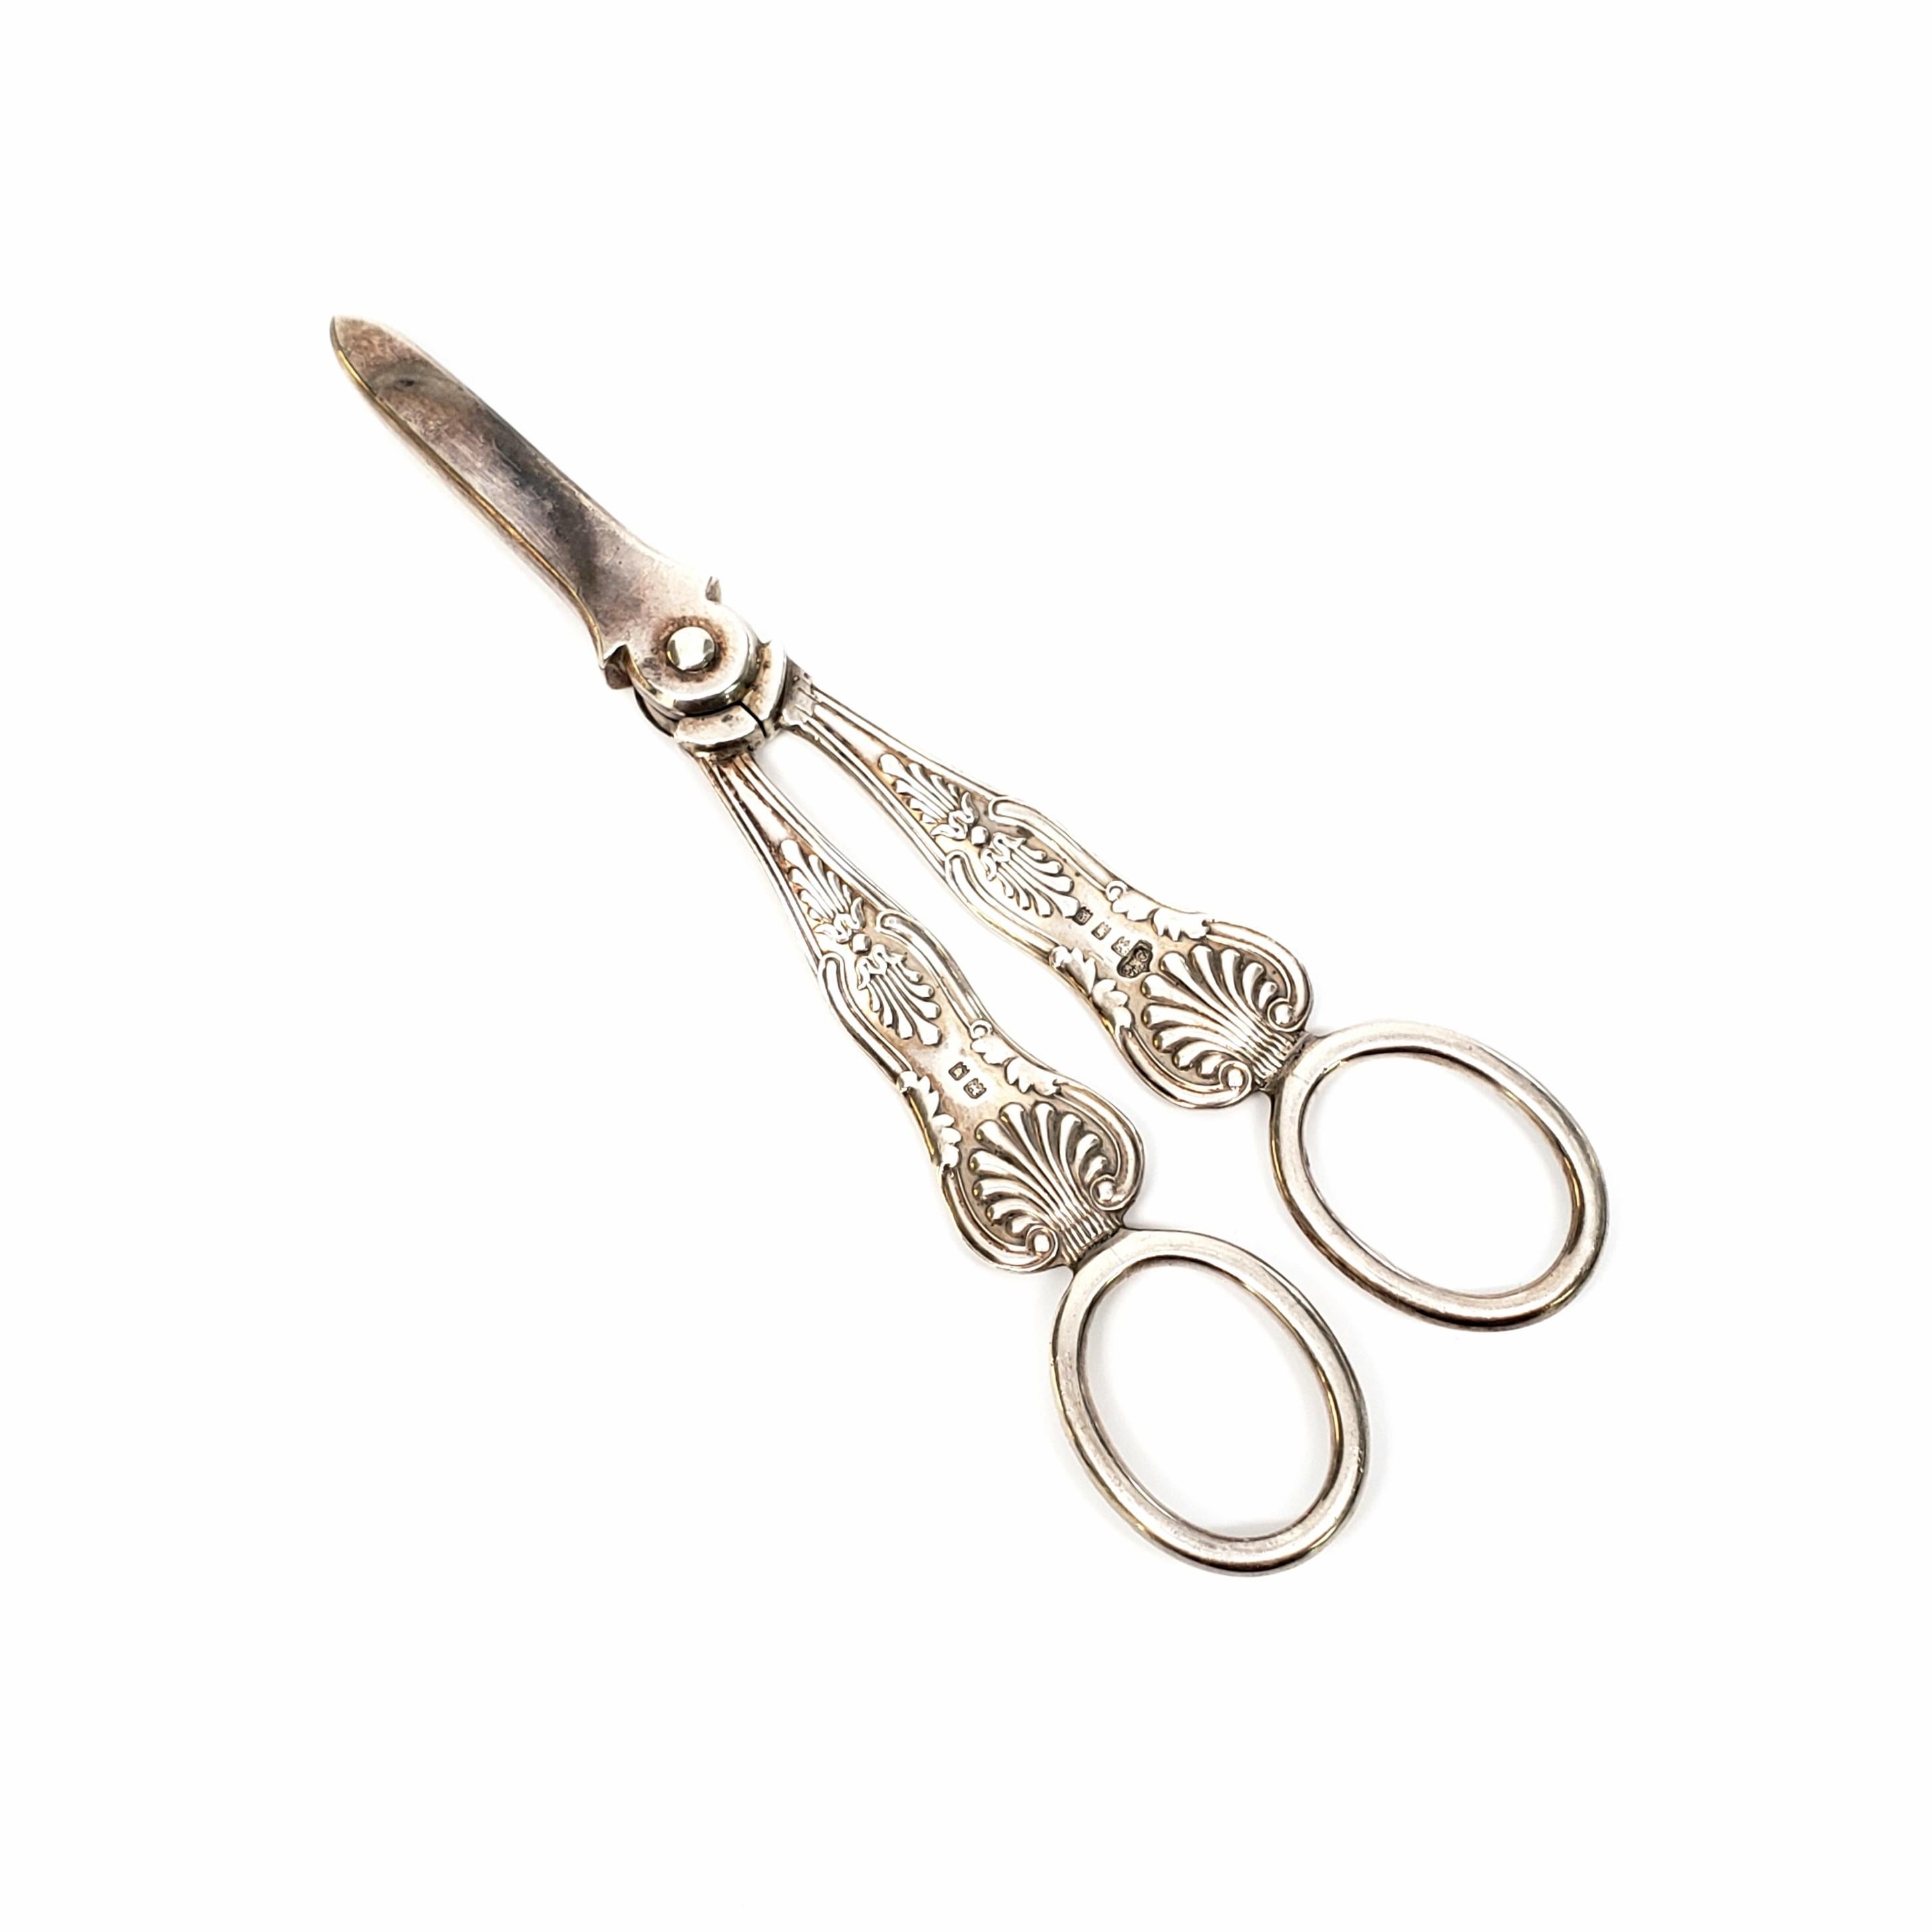 Vintage sterling silver grape shears by Wilson & Gill, circa 1922.

Wilson & Gill of Regent Street in London, were silversmiths of the late Victorian period who produced elegant and beautiful trinkets and centerpieces. These King's pattern grape